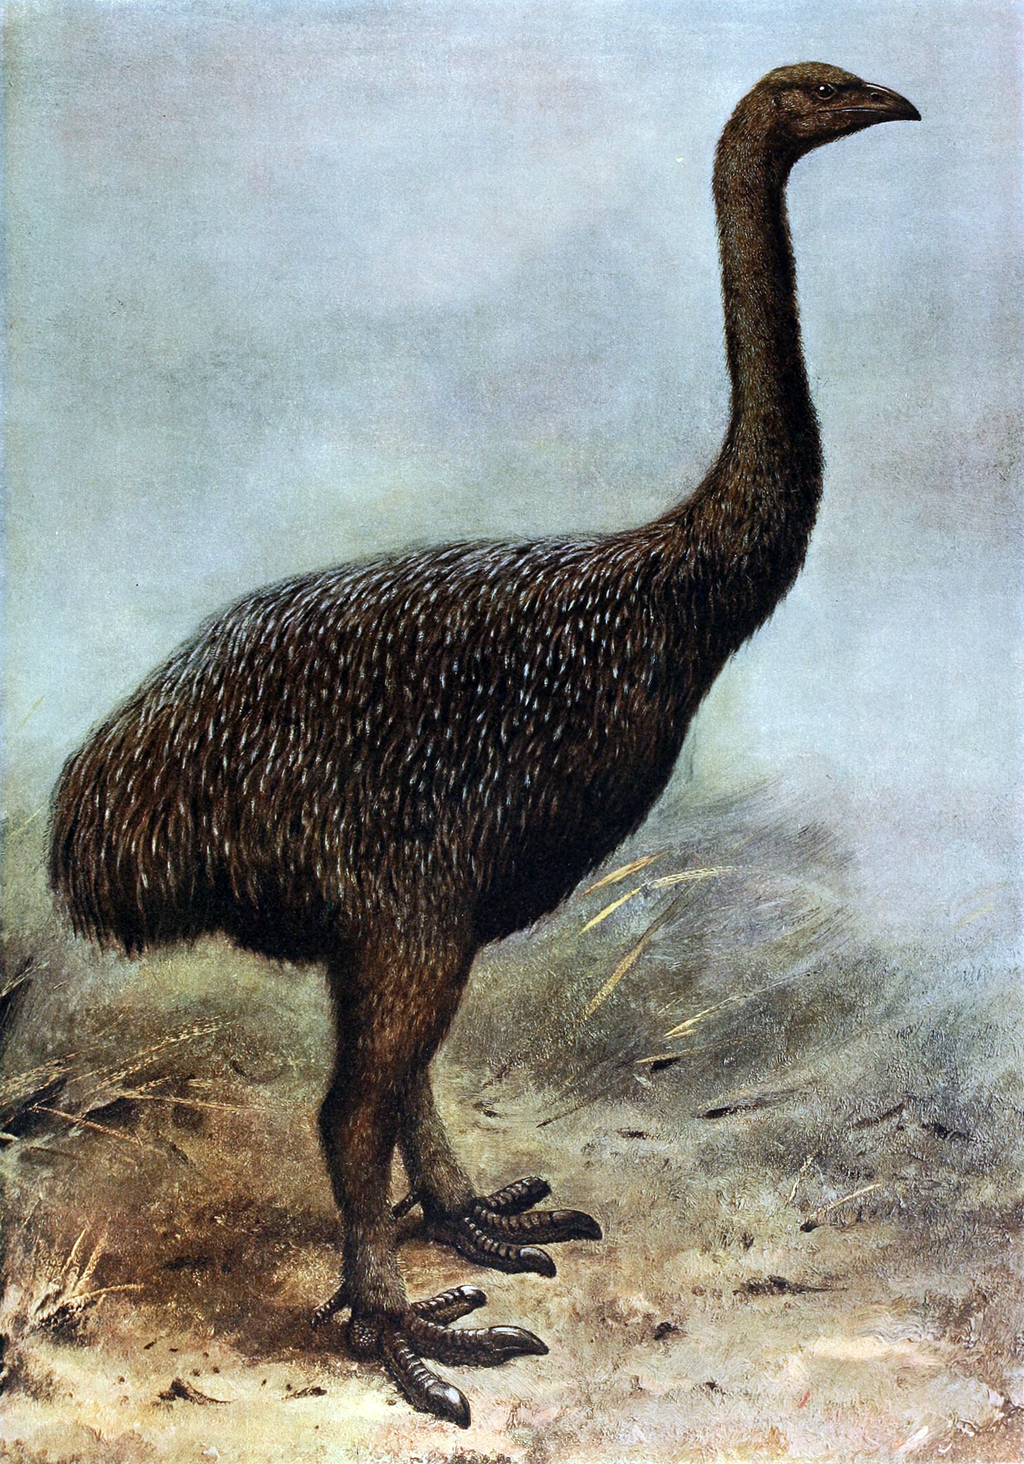 The Moa, a long-extinct bird once native to Aotearoa New Zealand. It stands incredibly high, comparable to an emu or ostrich.